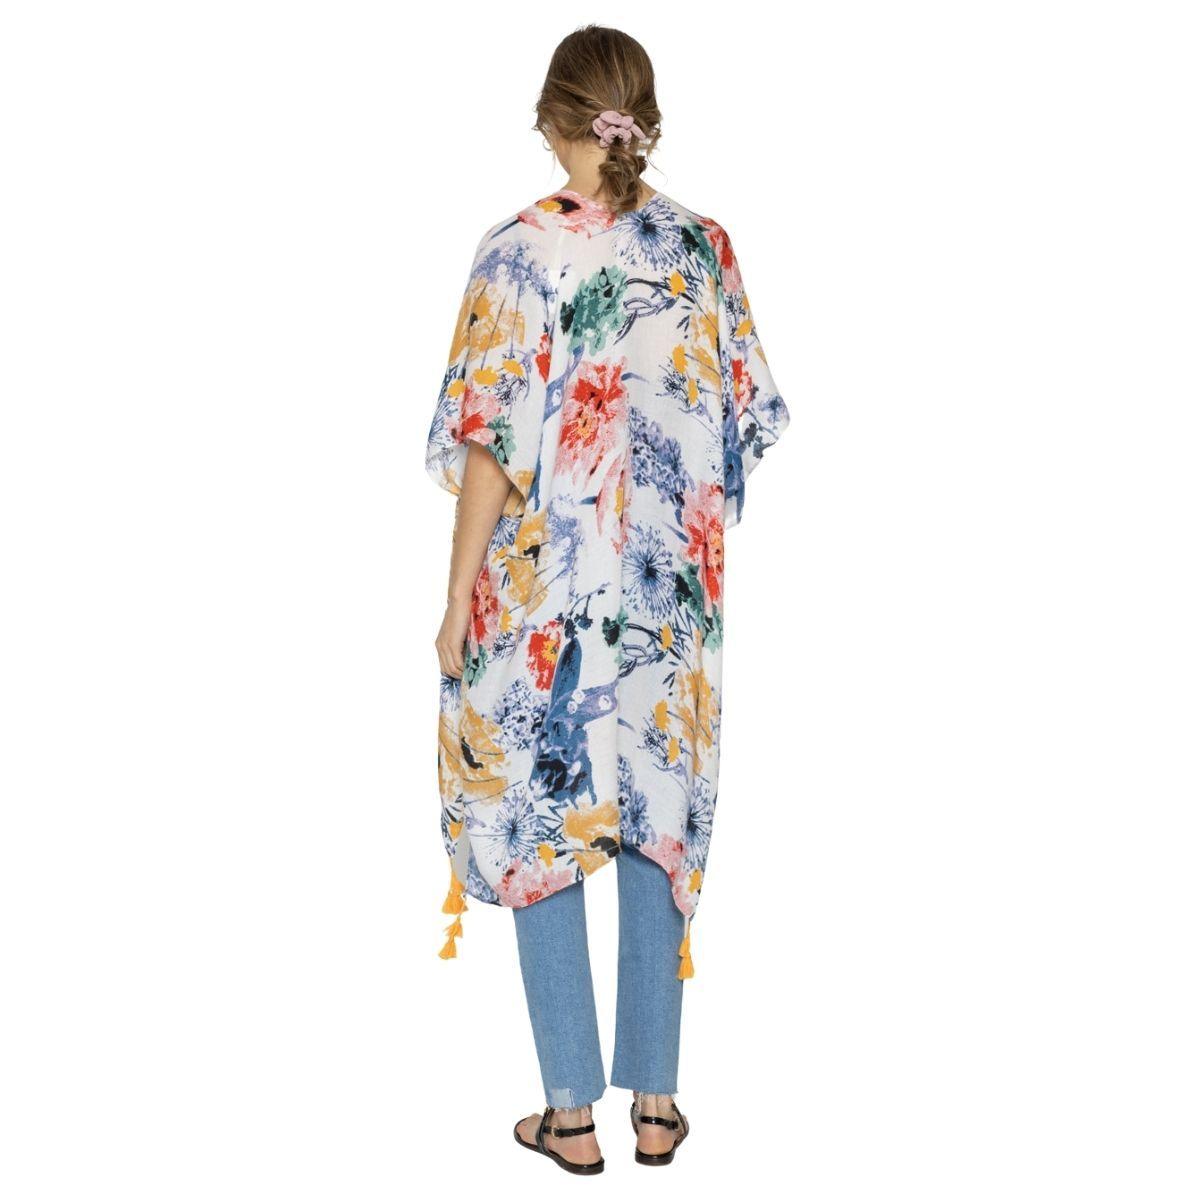 Get Noticed with our Multicolor Floral Kimono Coverup Top